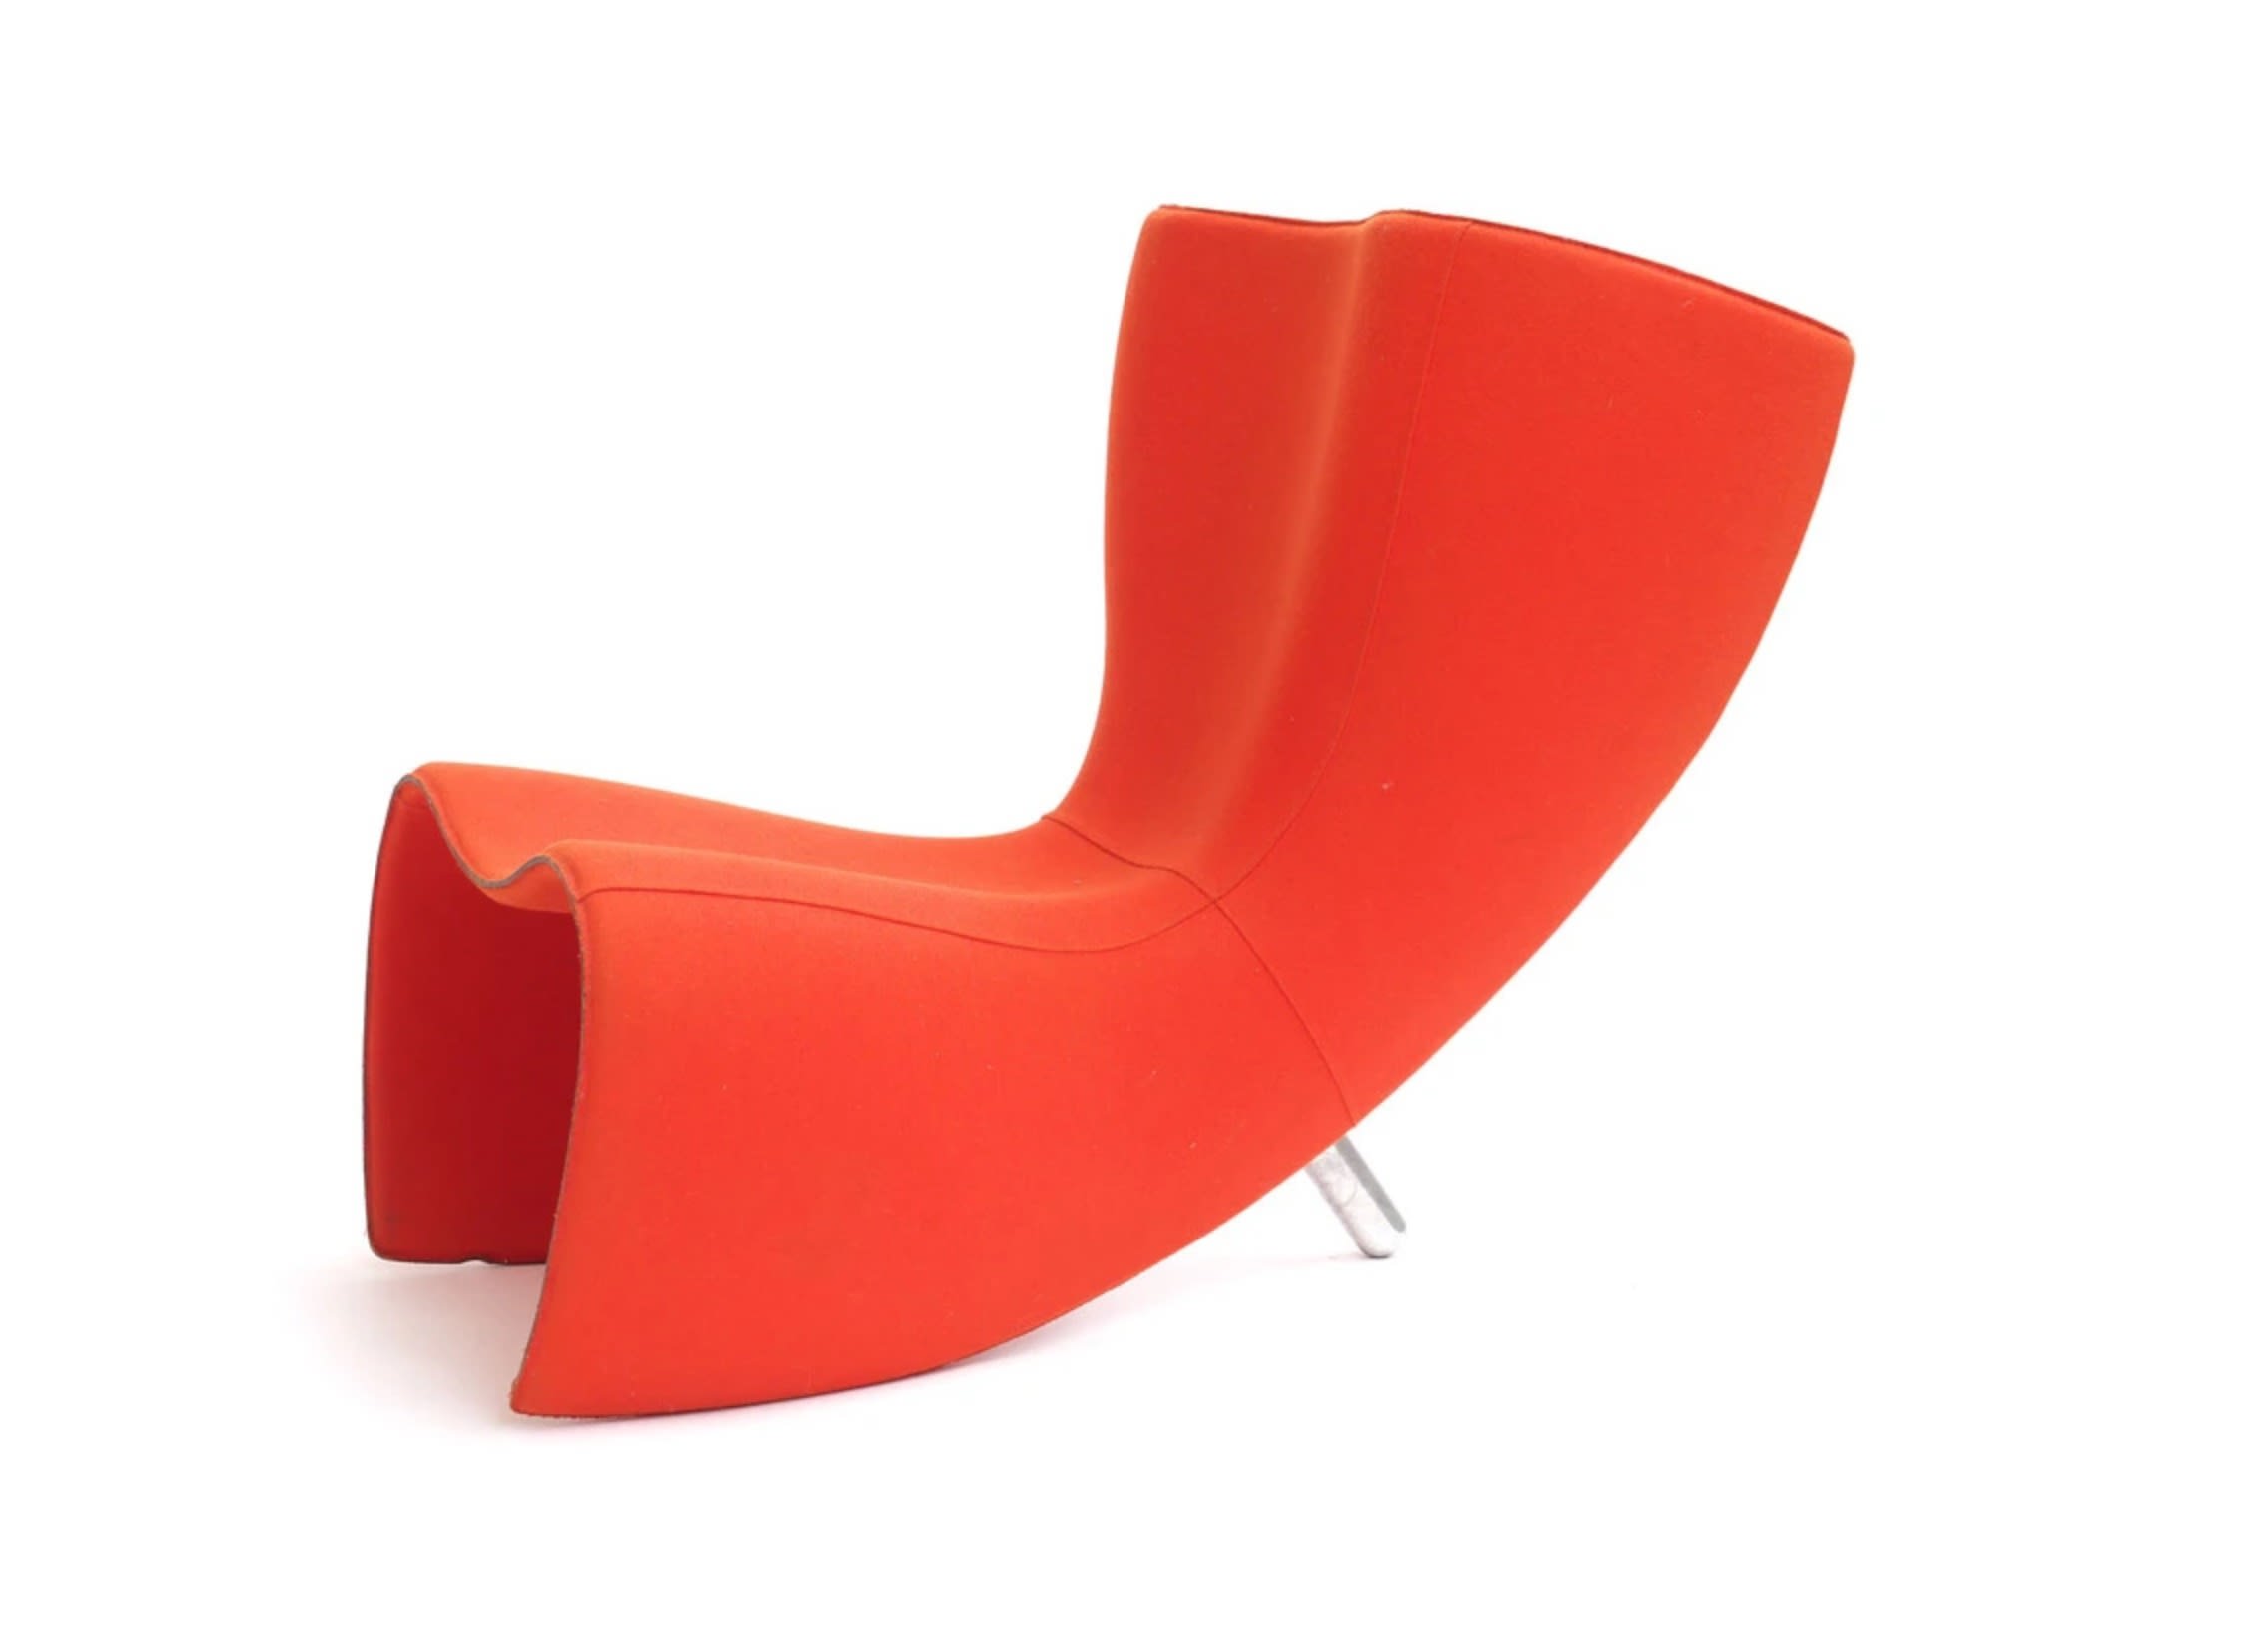 The History Behind Marc Newson's Famous Felt Chair